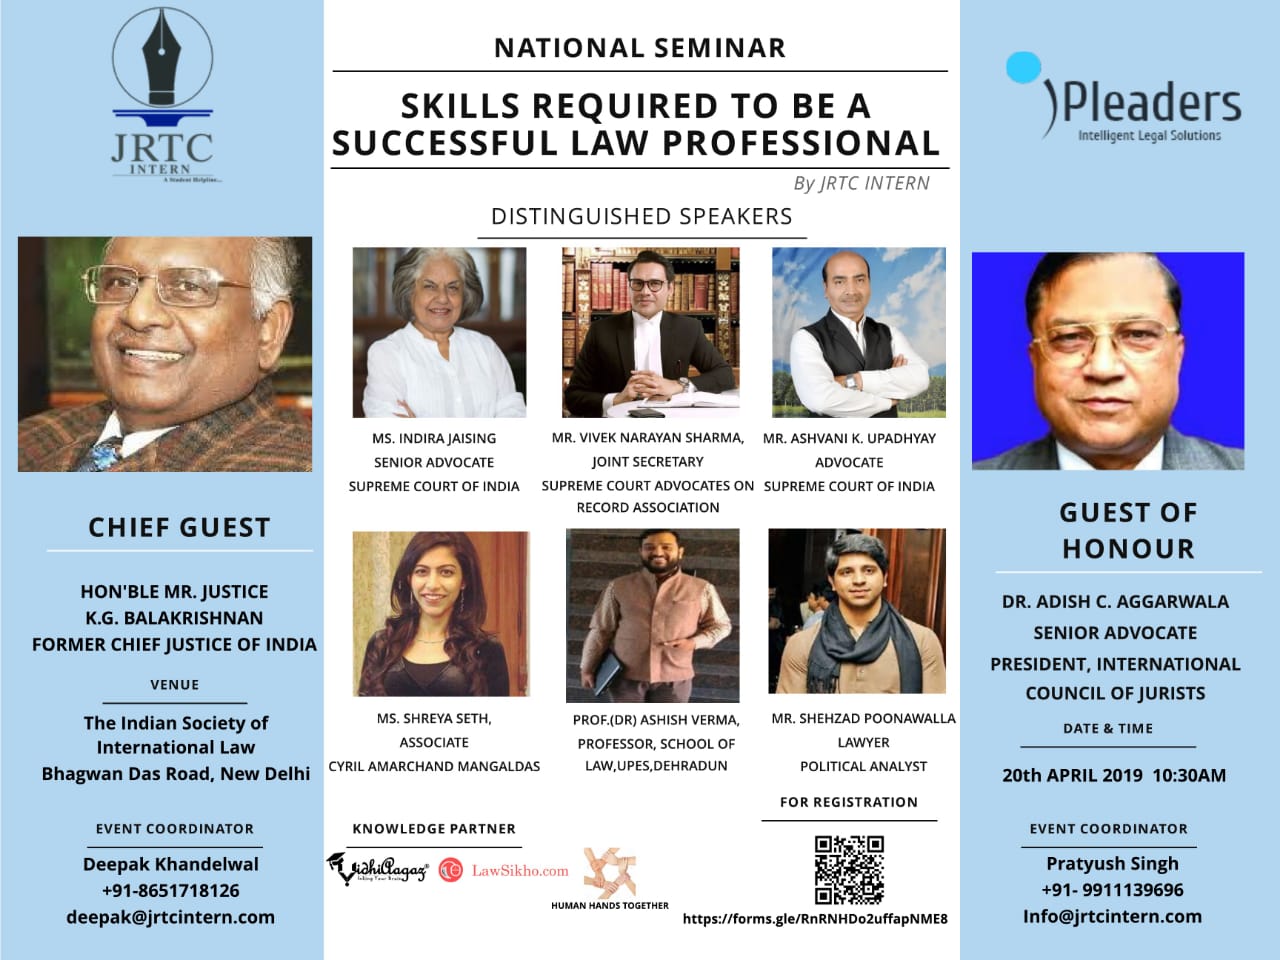 SKILLS REQUIRED TO BE A SUCCESSFUL LAW PROFESSIONAL